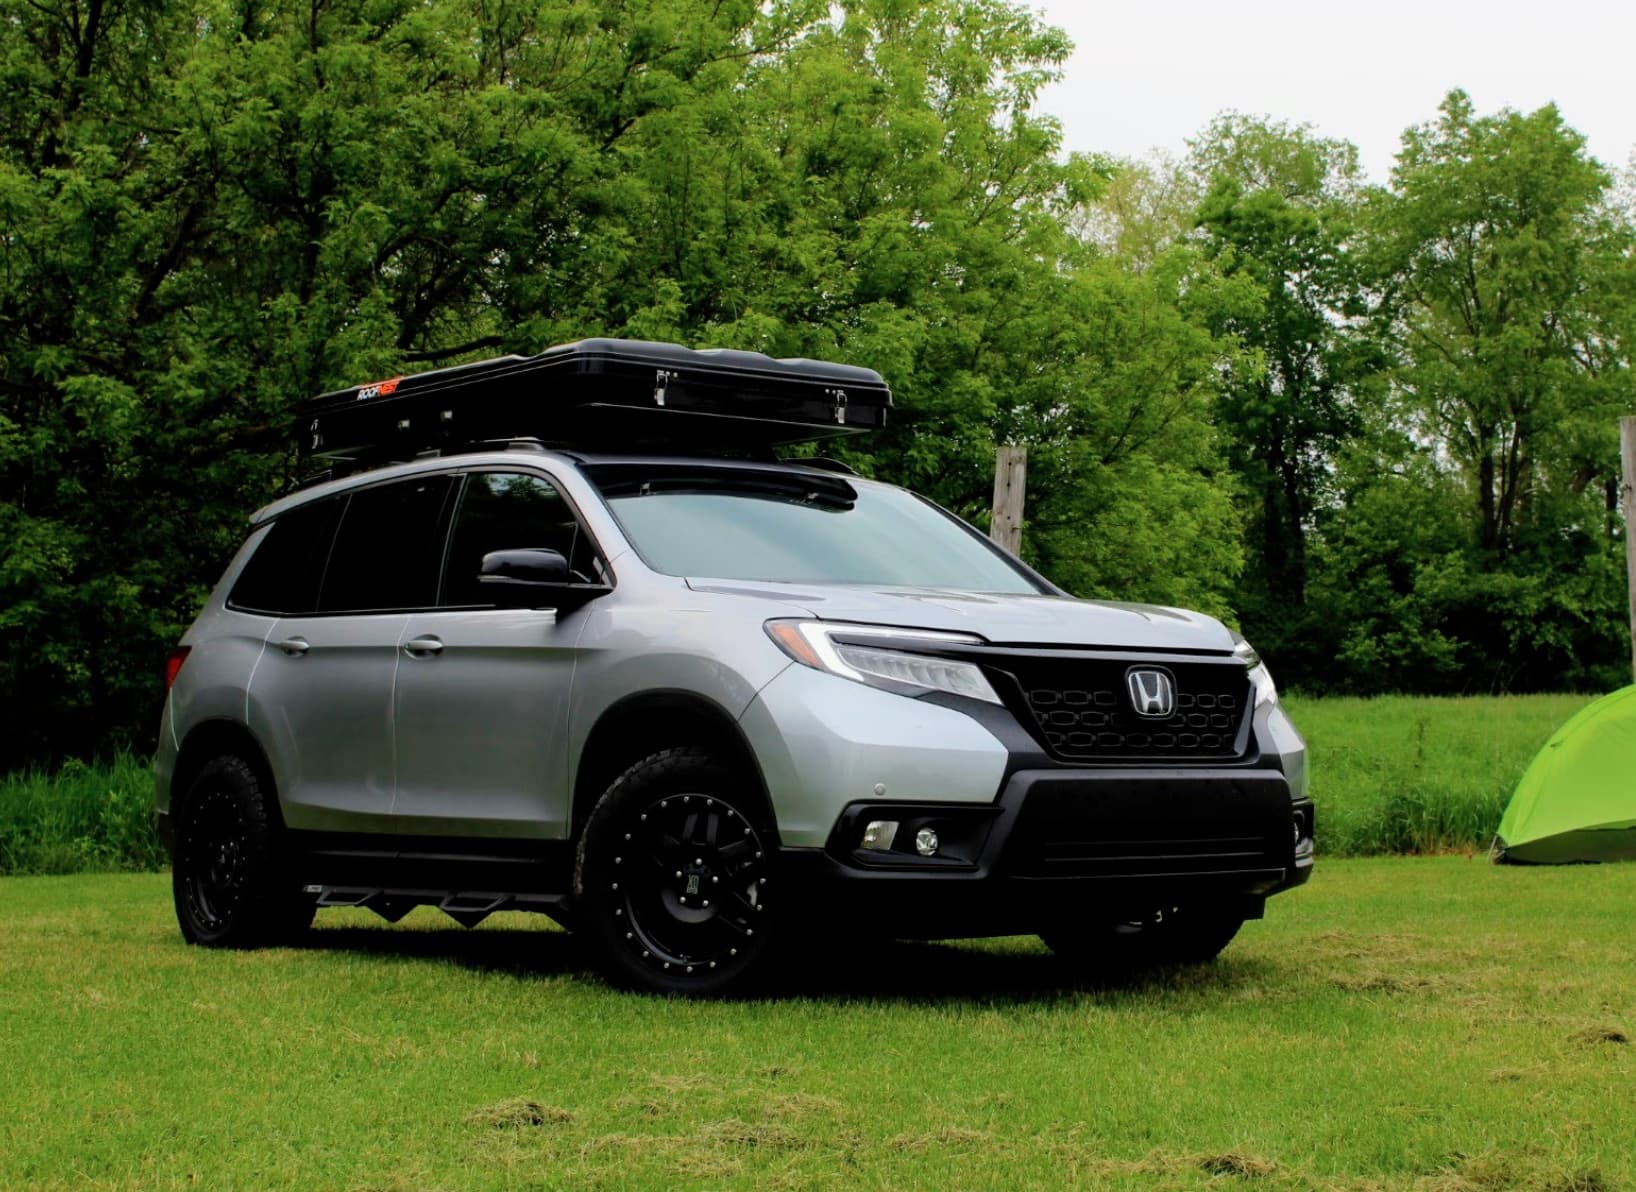 2019 Honda Passport review: This is the best mid-size SUV